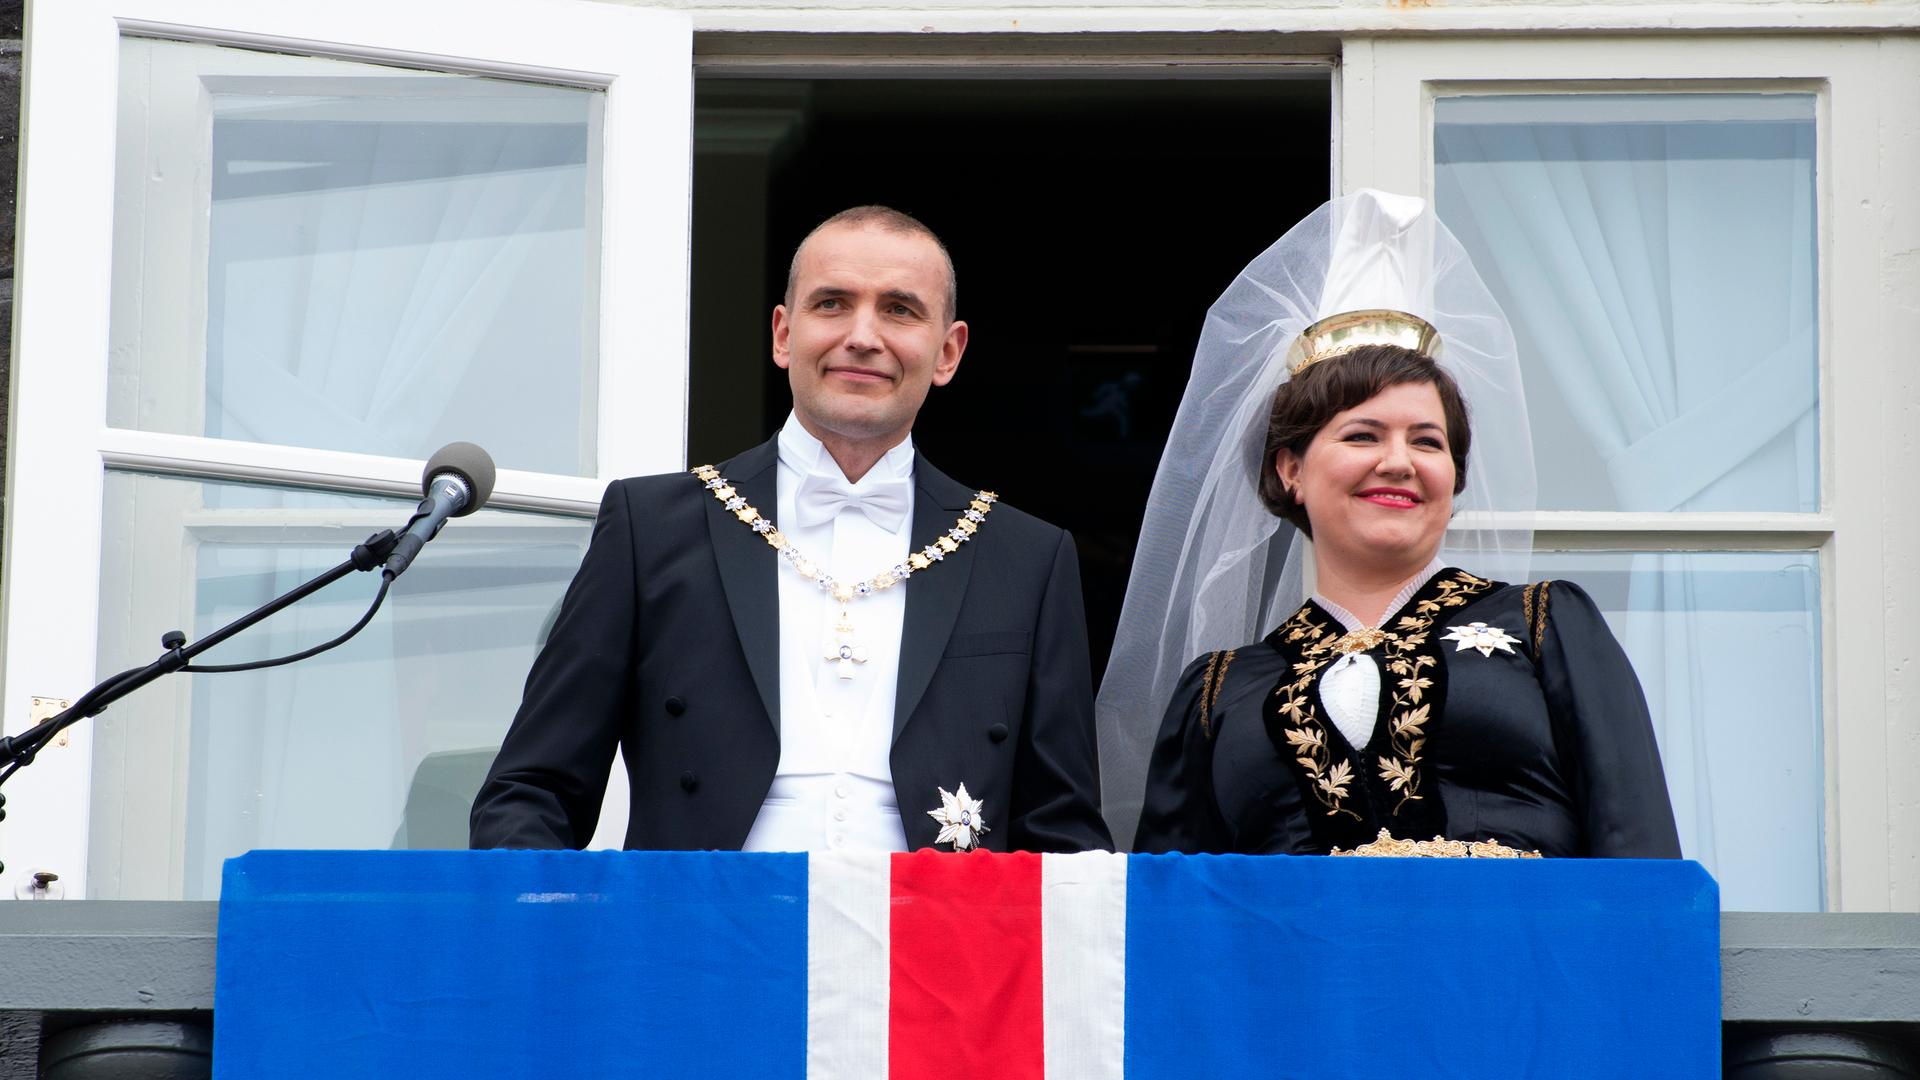 Man and woman wearing crown stand on balcony with blue, white and red flag in front of them